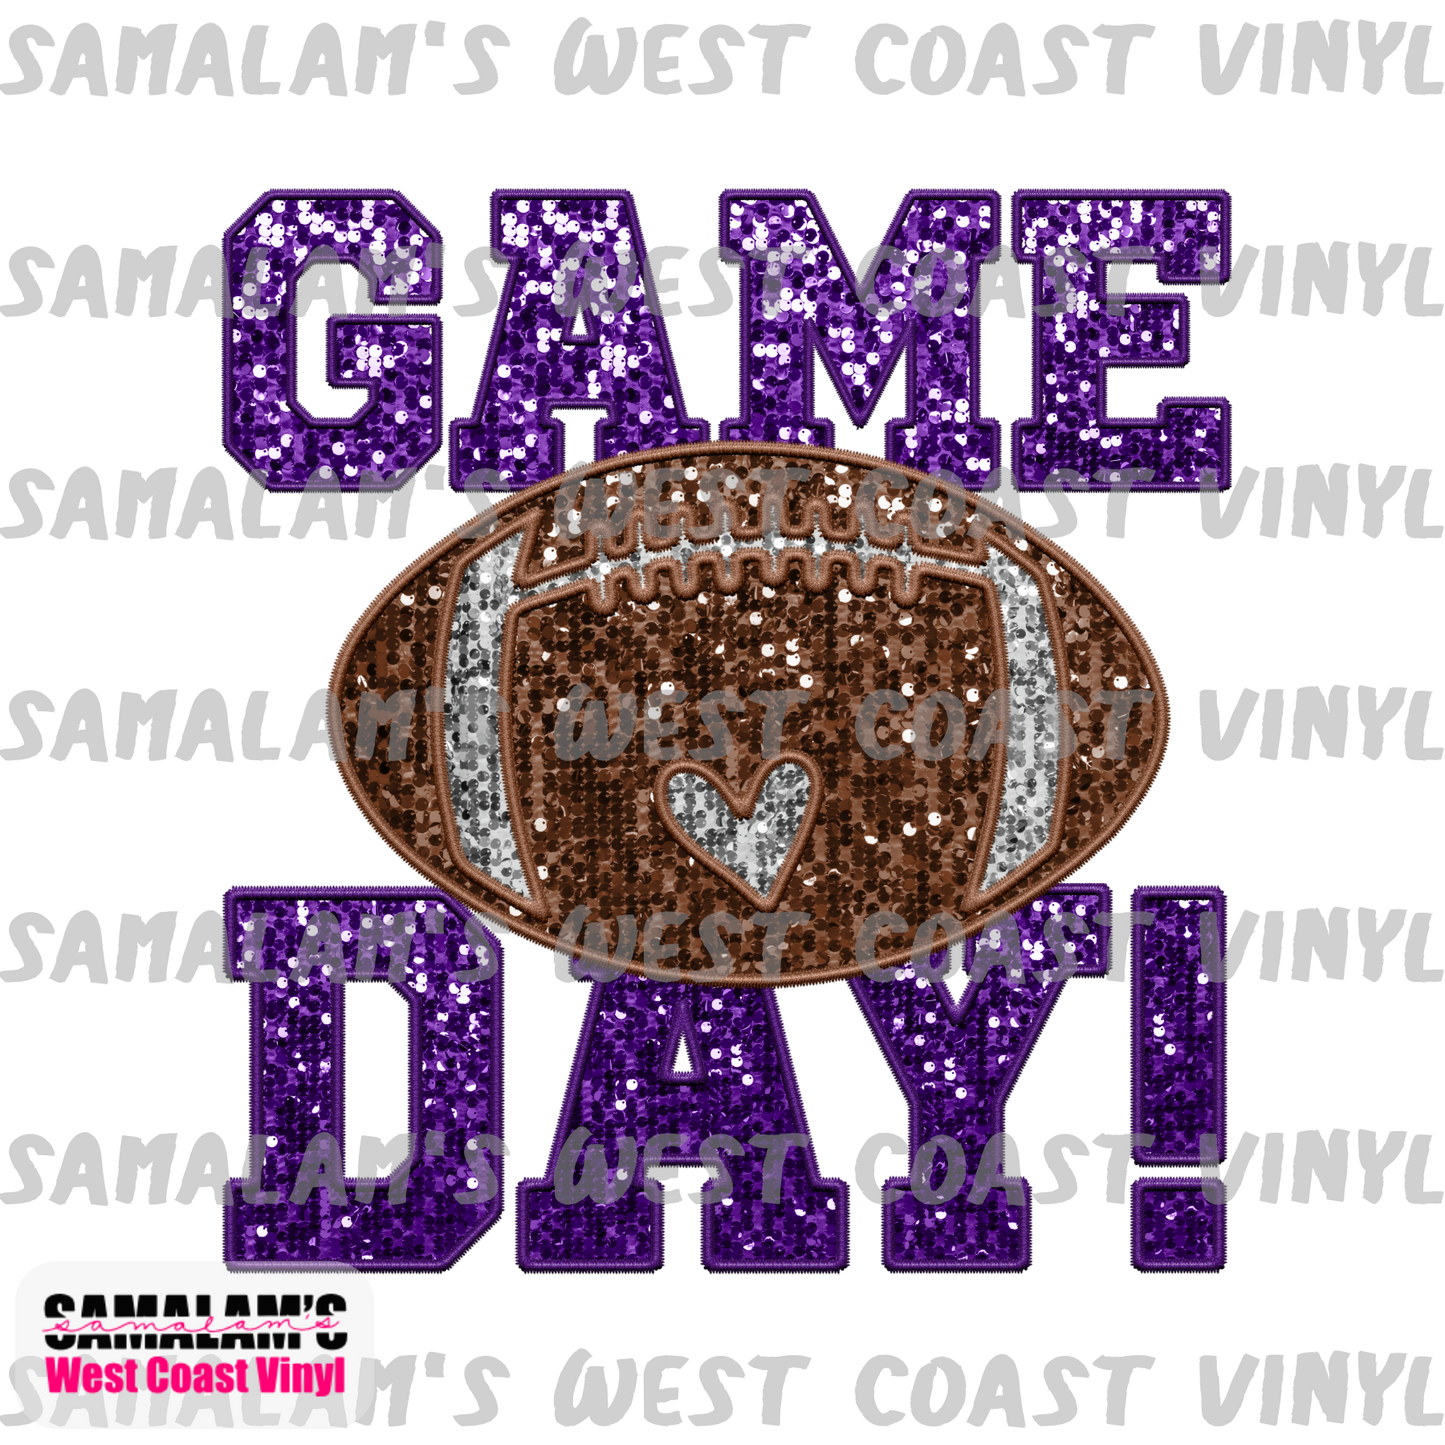 Embroidery - Game Day - Purple - Clear Cast Decal